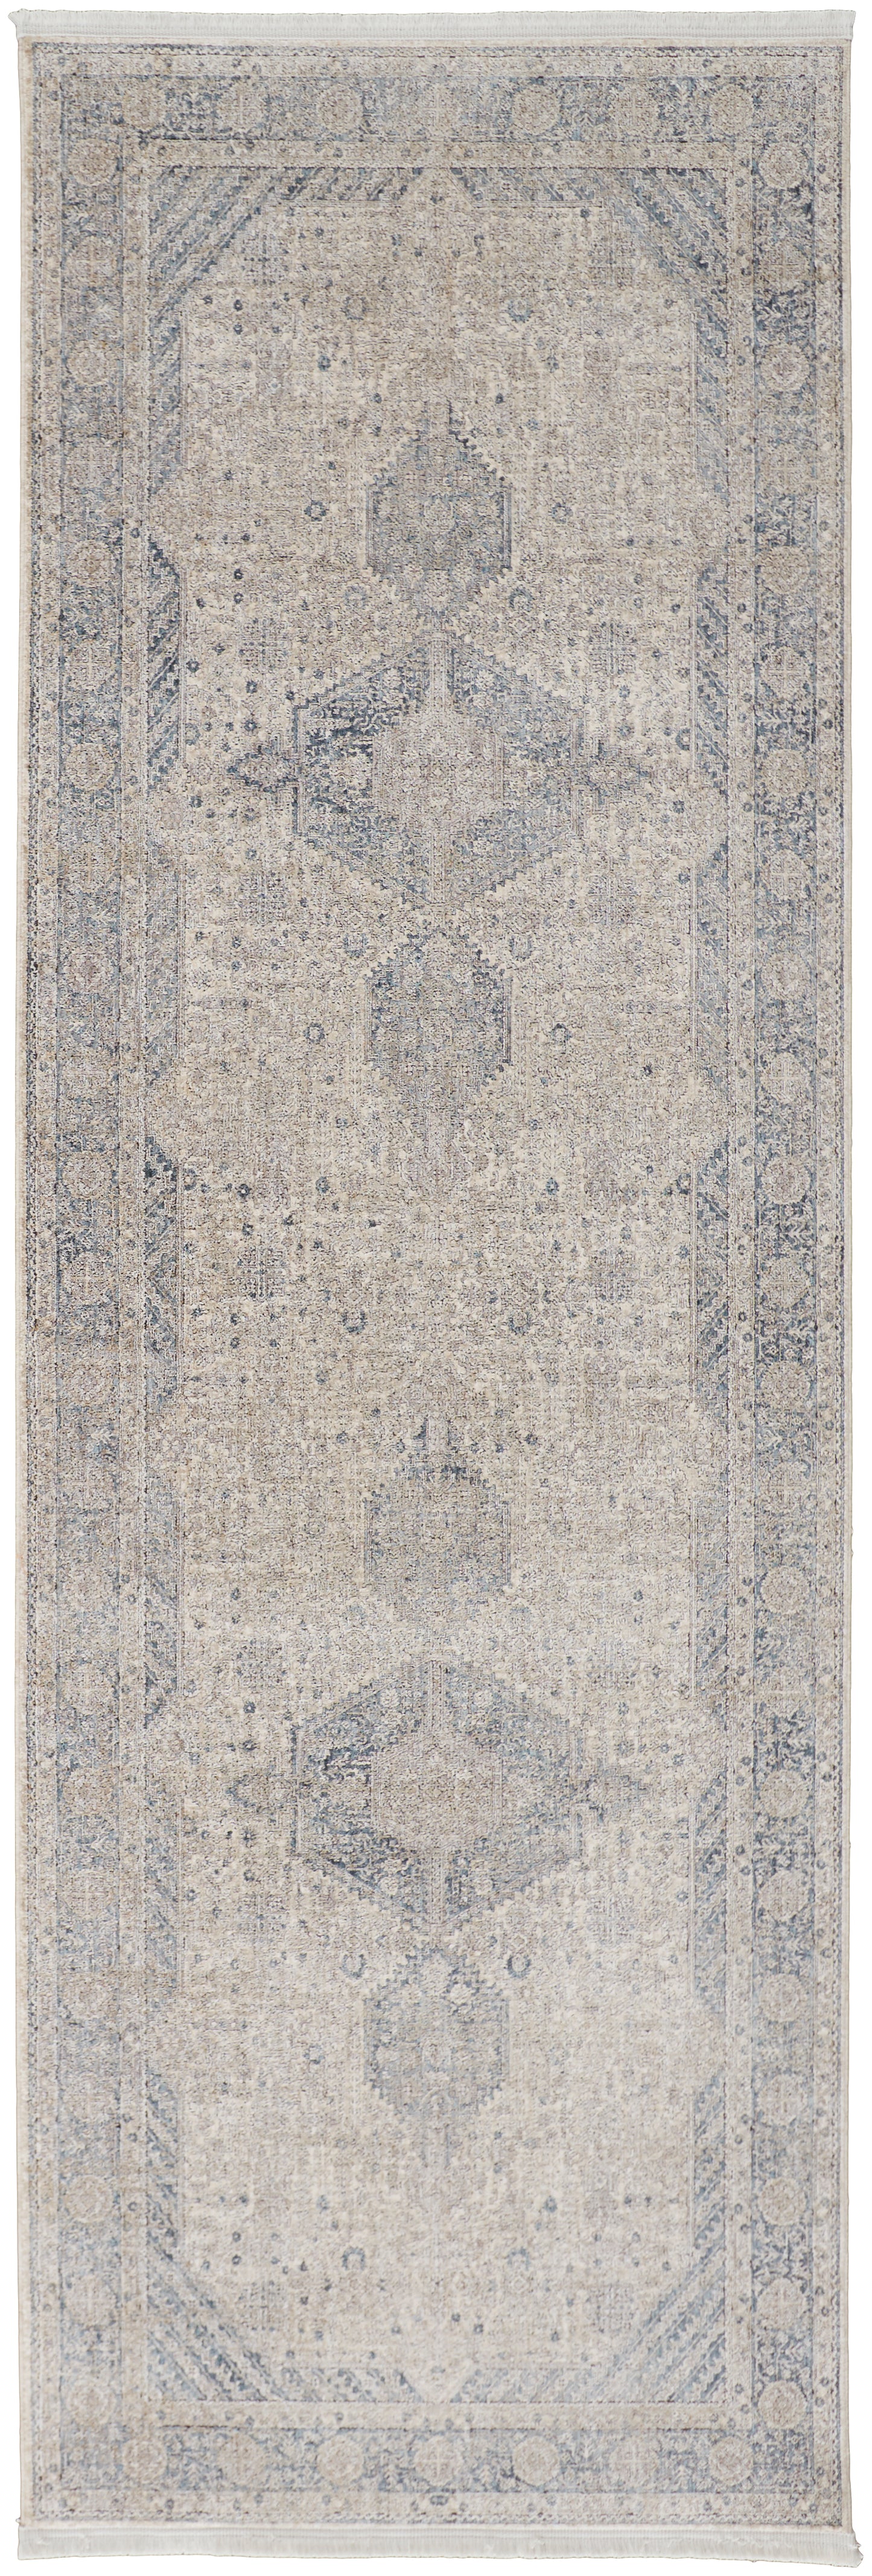 Marquette 3775F Machine Made Synthetic Blend Indoor Area Rug by Feizy Rugs